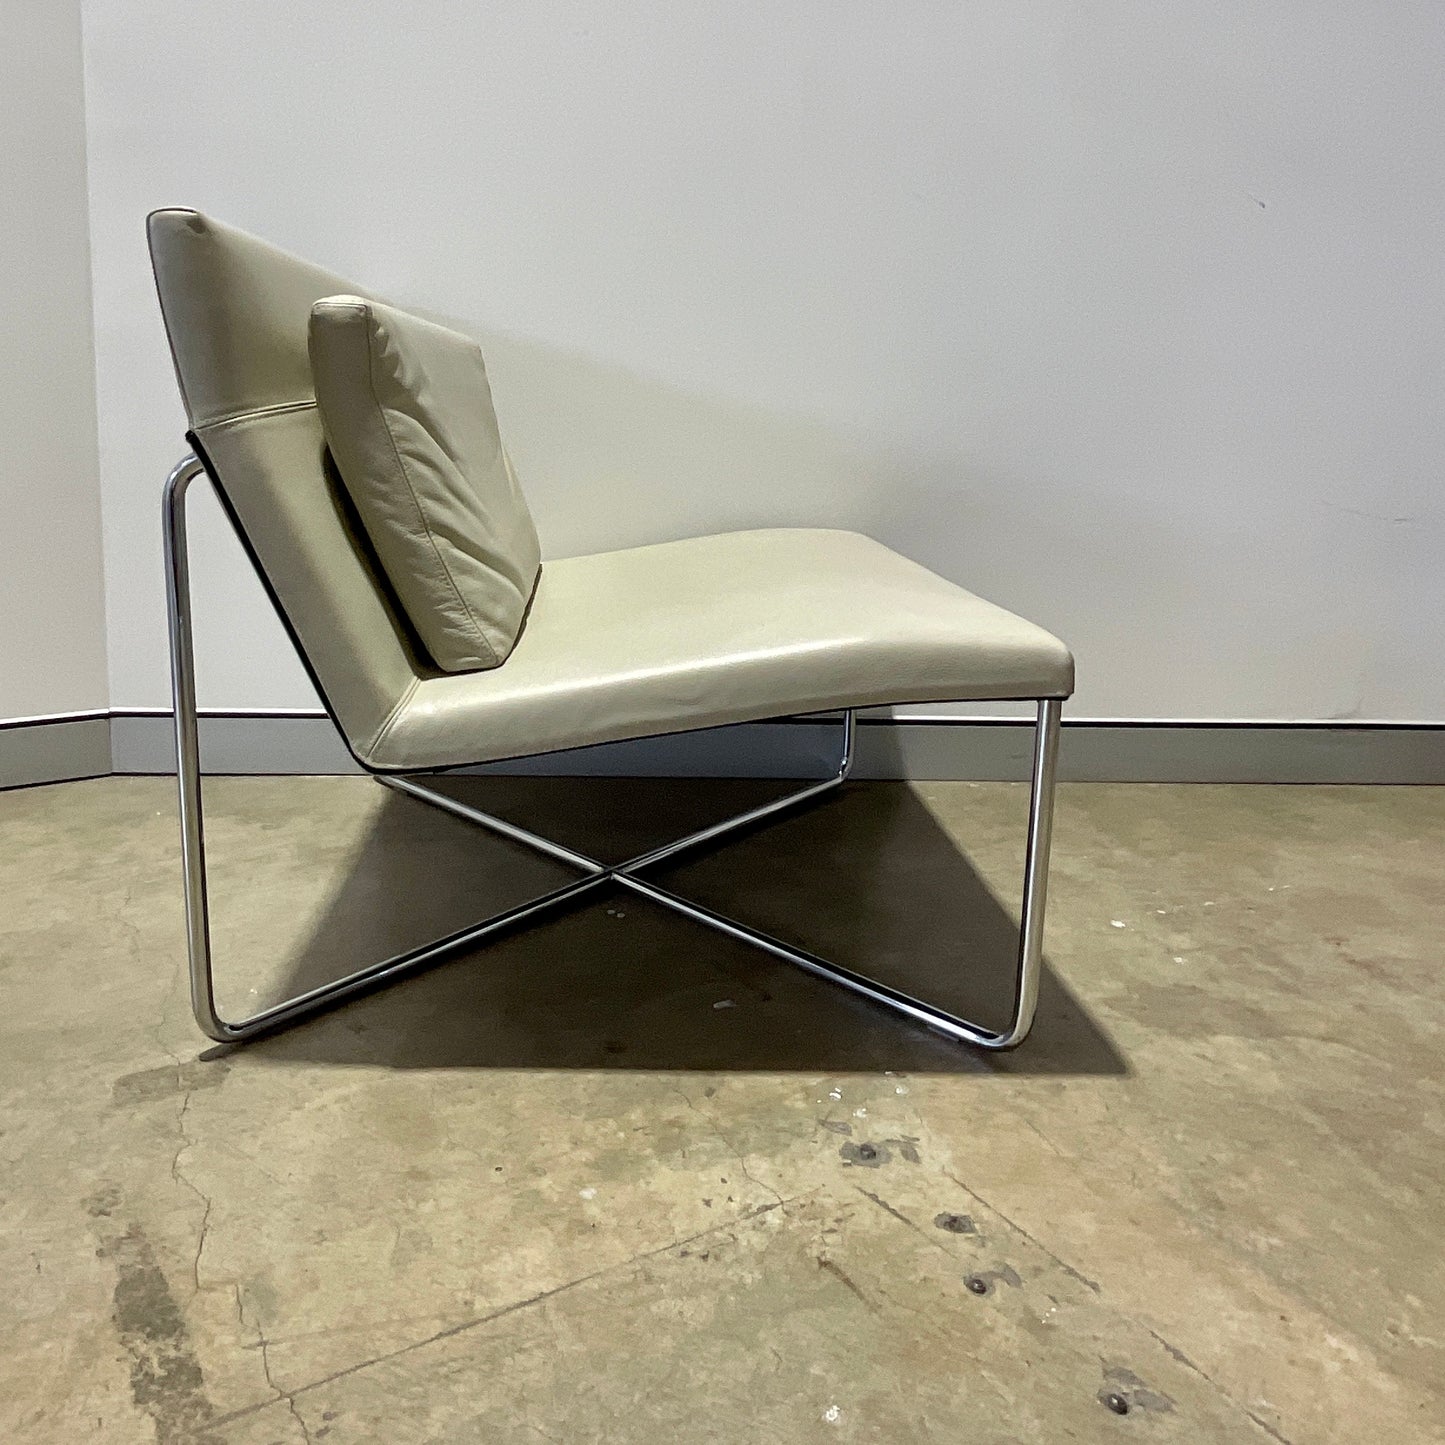 Held Chair by Rodolfo Dordoni for Minotti (2 available)